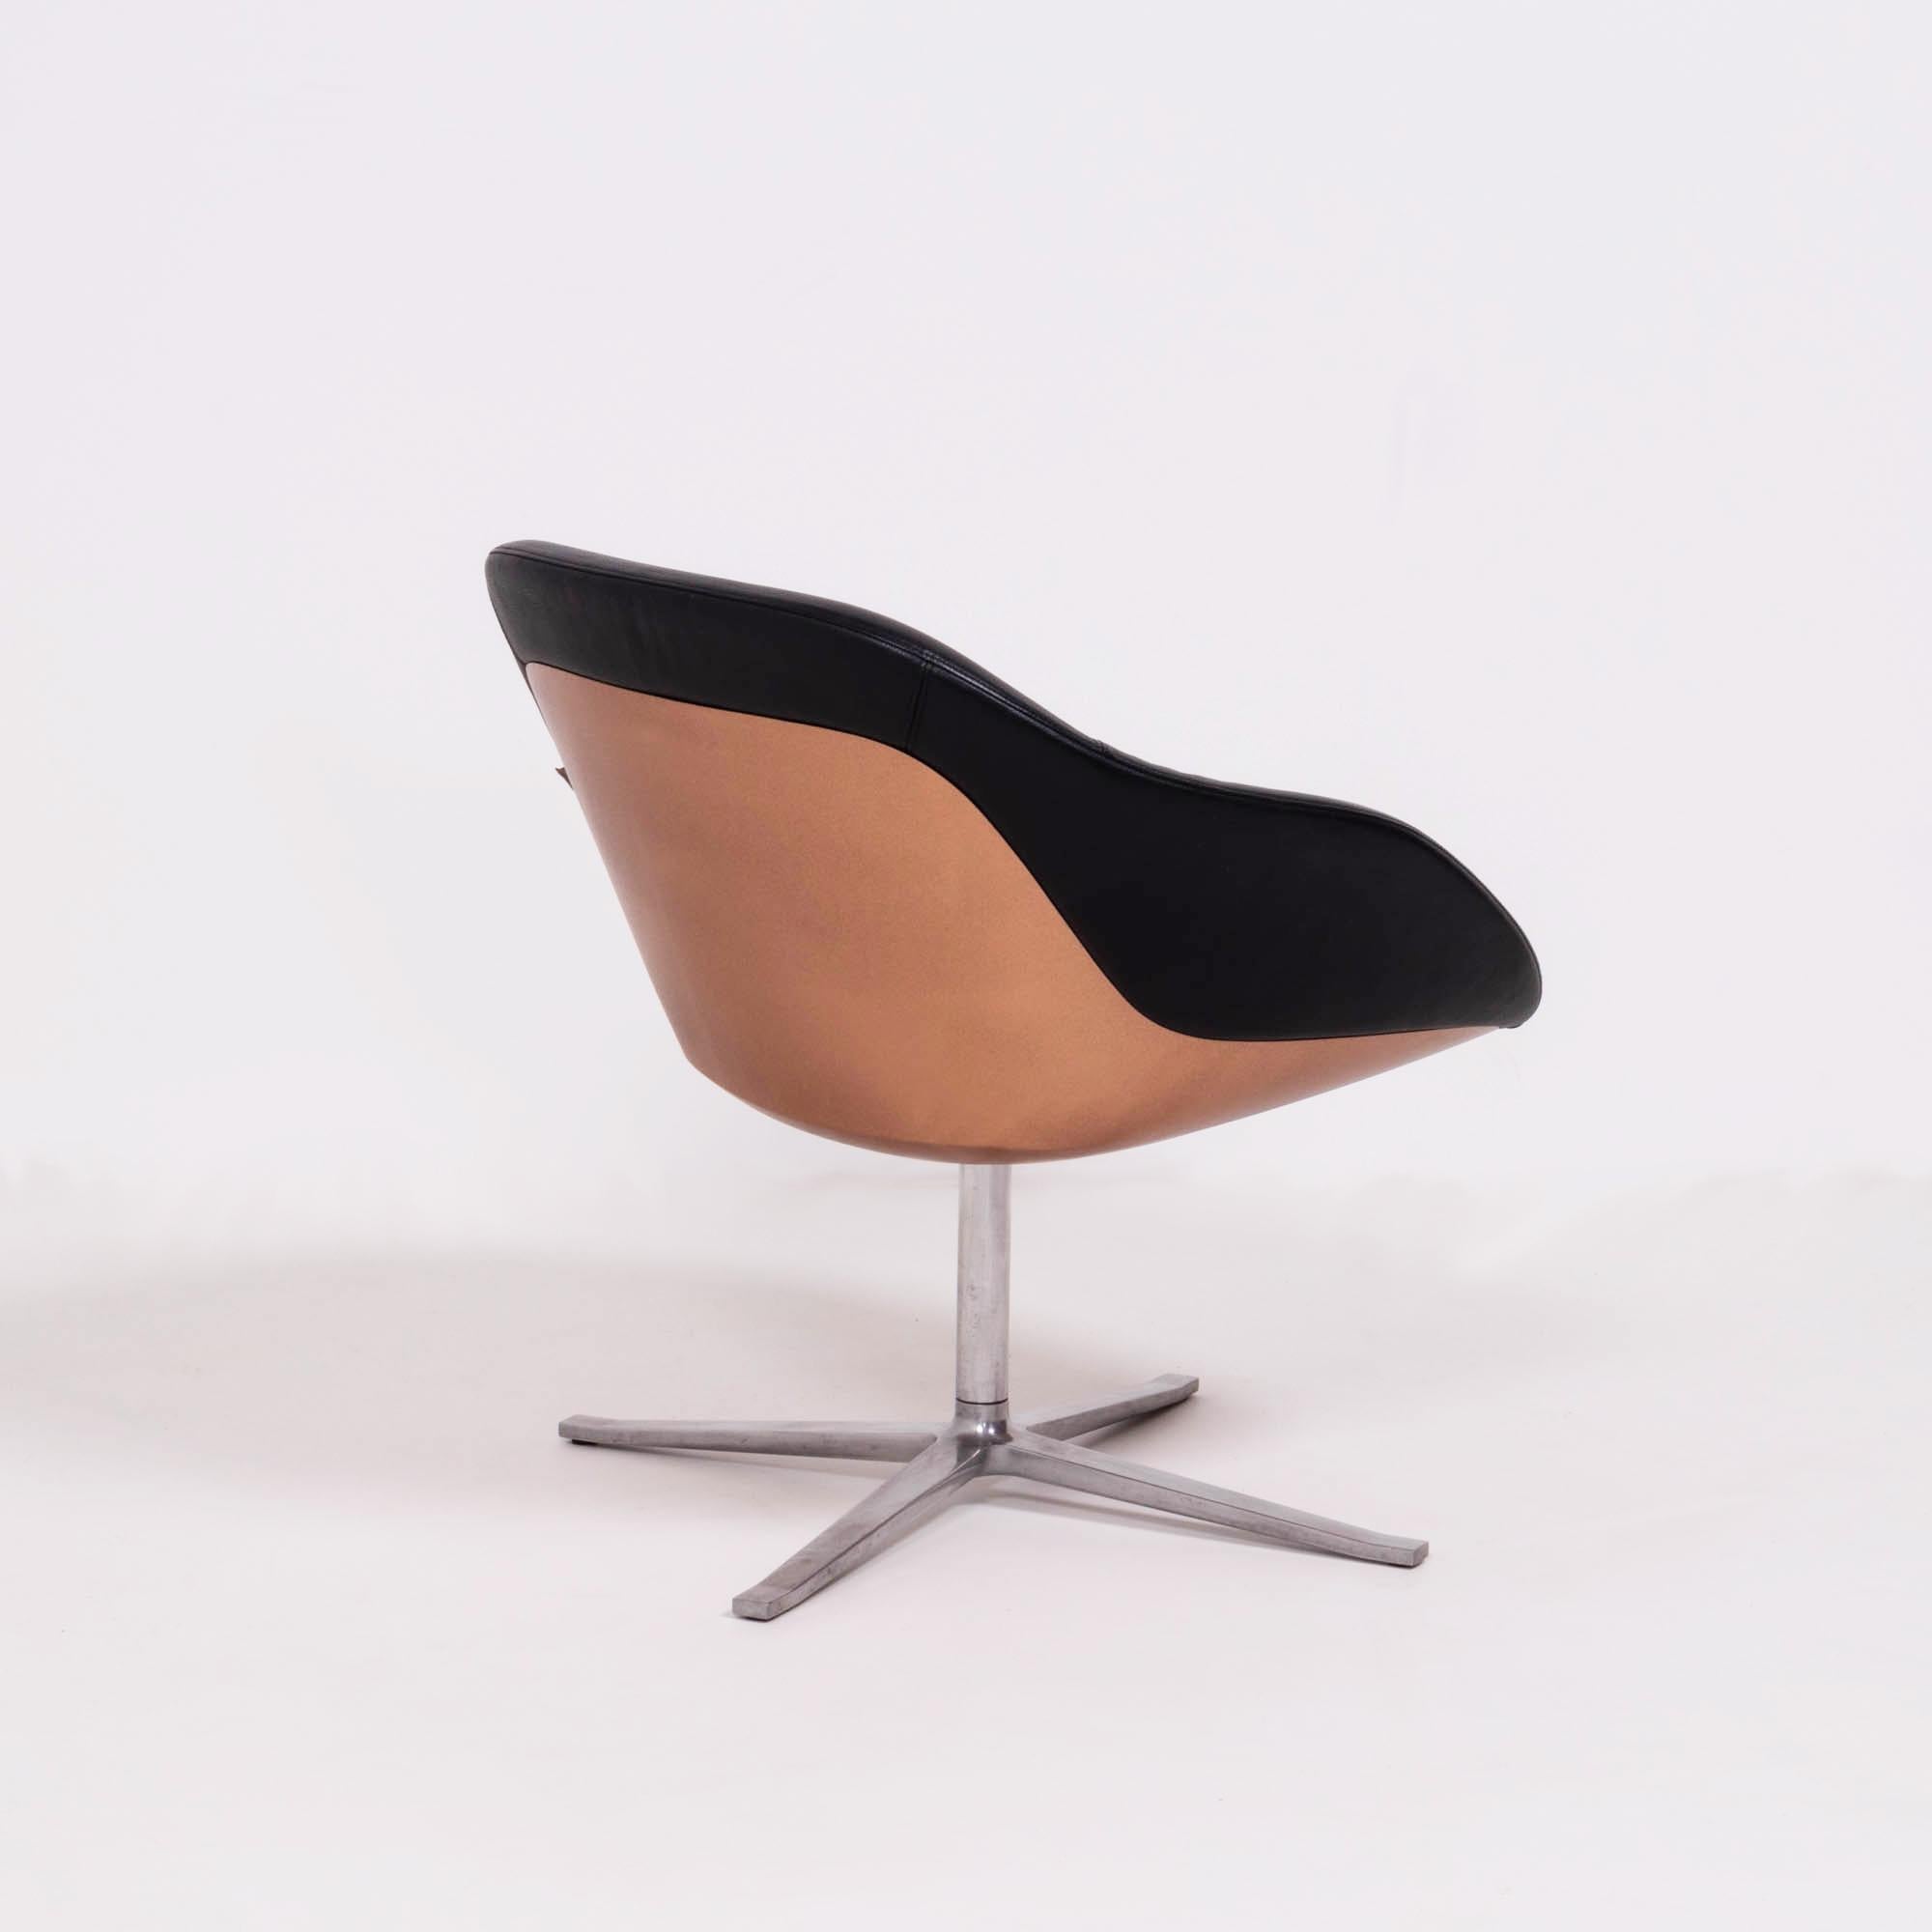 walter knoll turtle chair